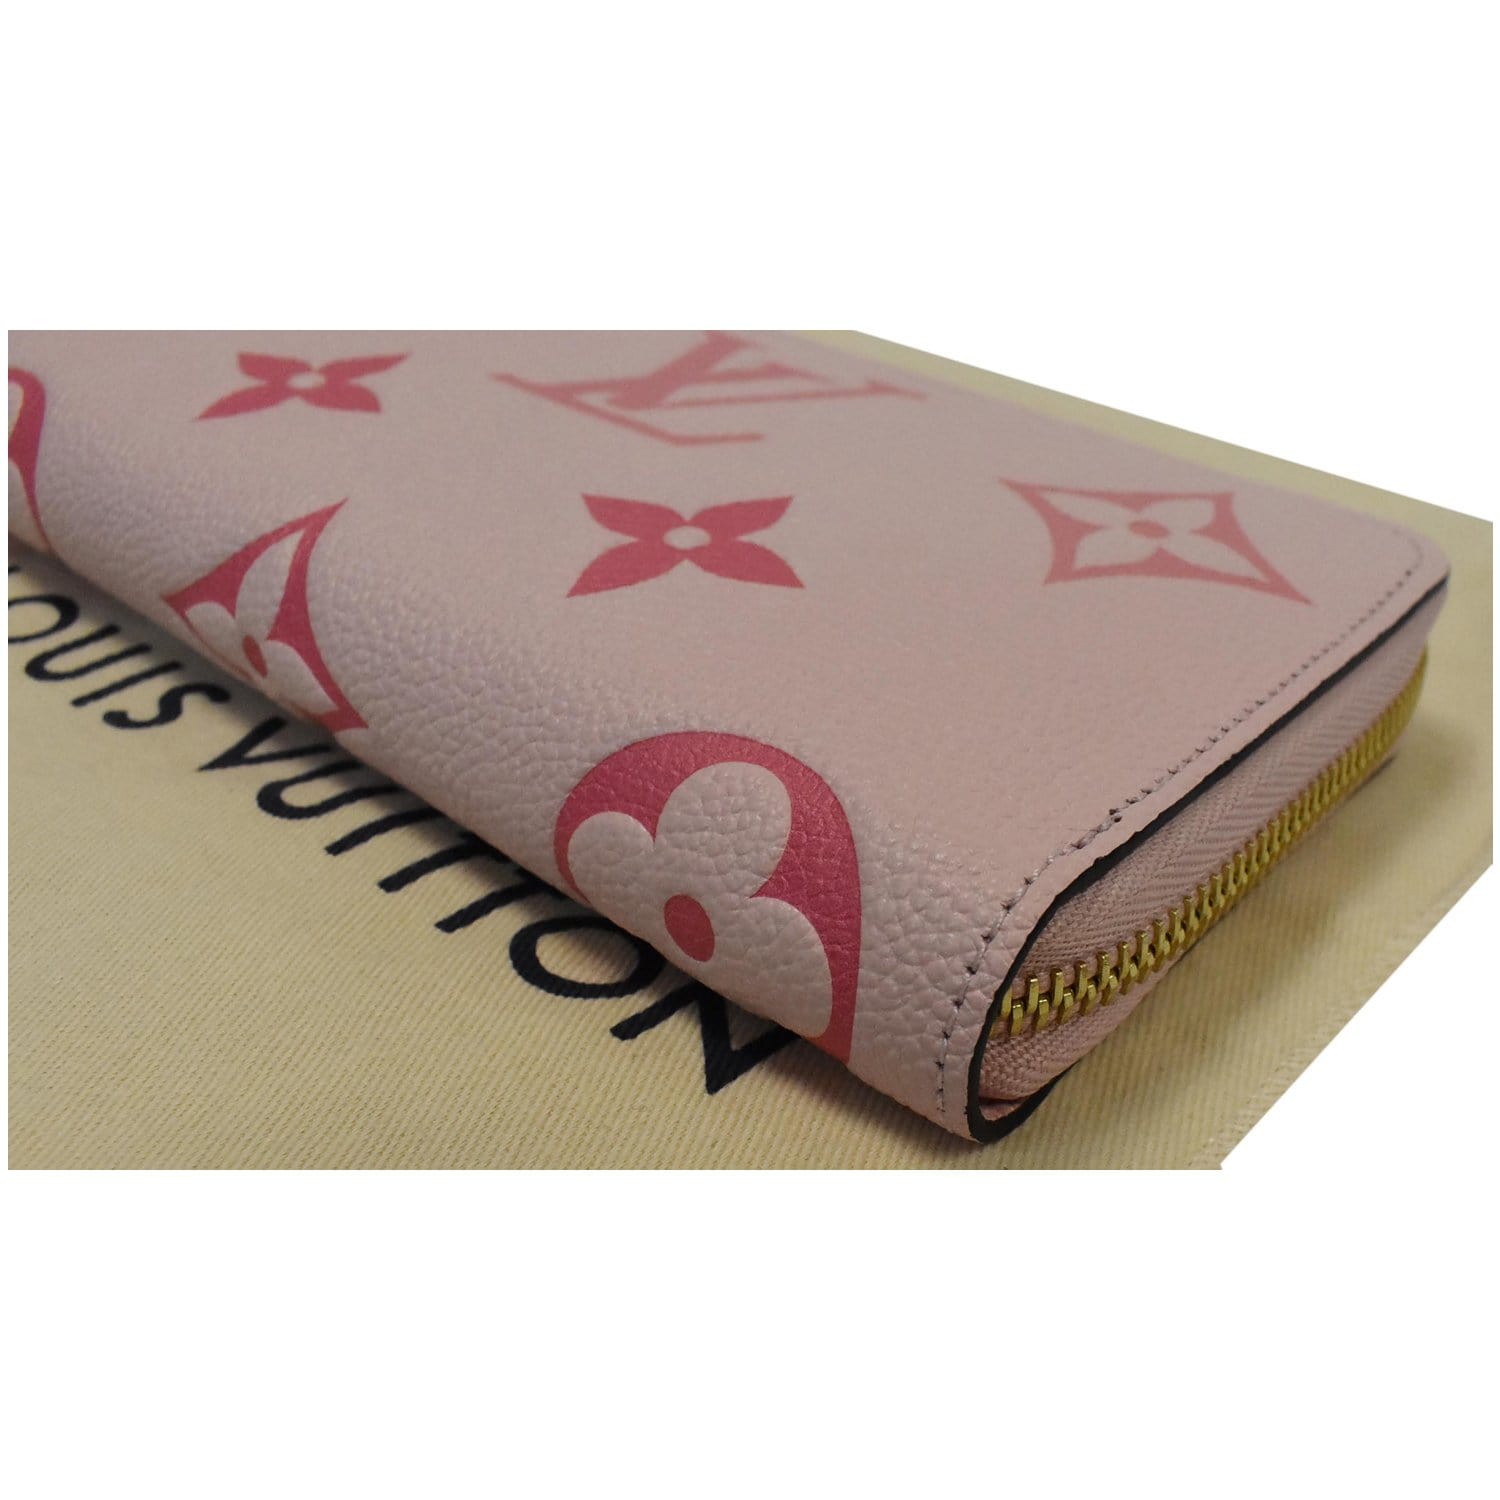 Louis Vuitton Empreinte By The Pool Cosmetic Pouch - Pink Cosmetic